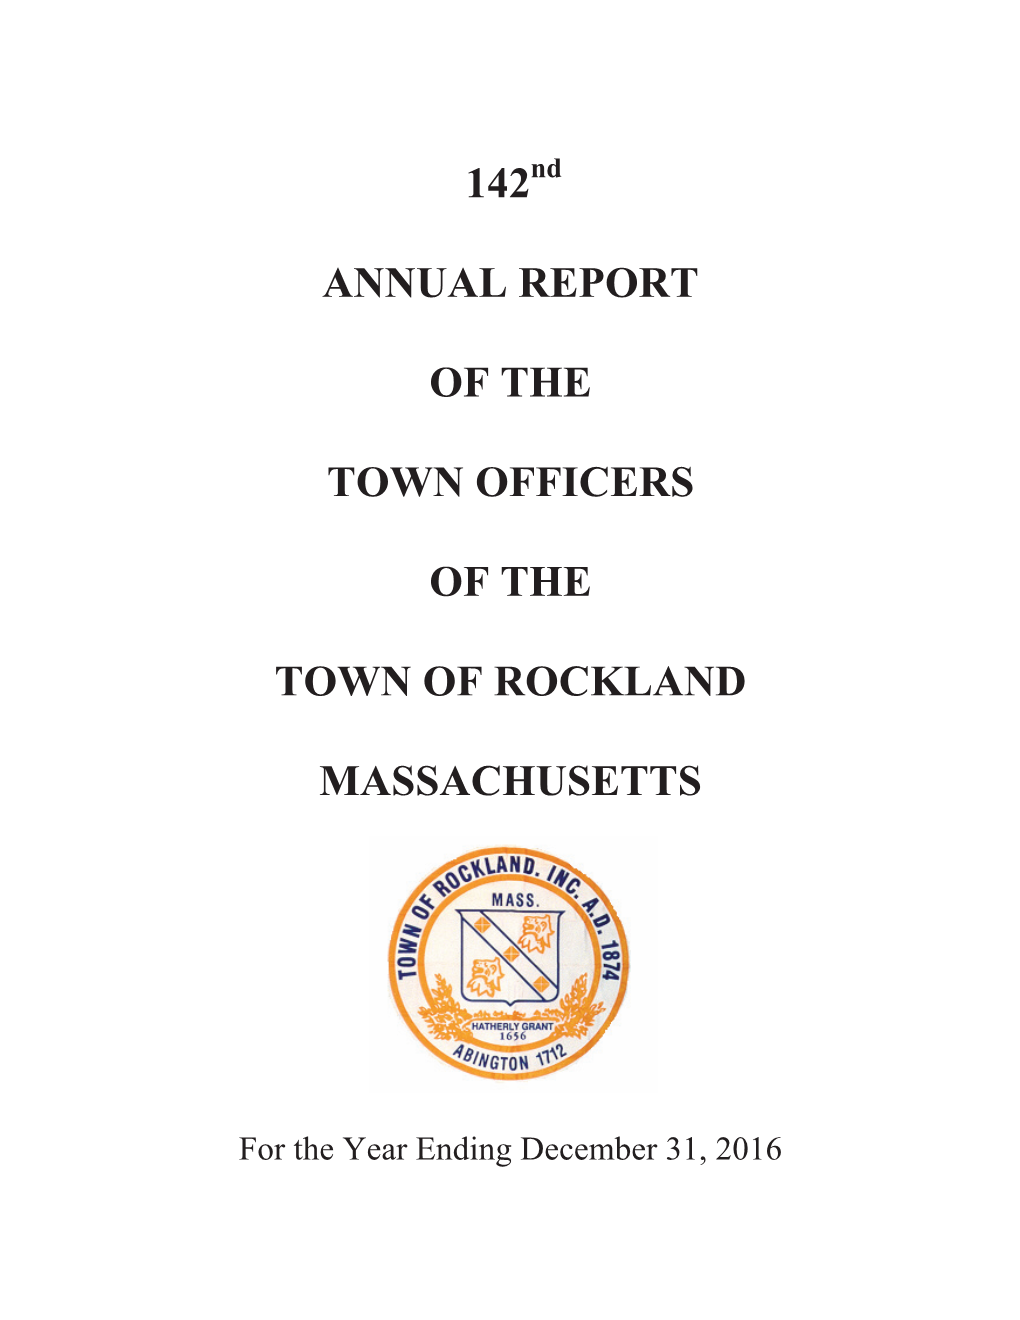 142 Annual Report of the Town Officers of the Town